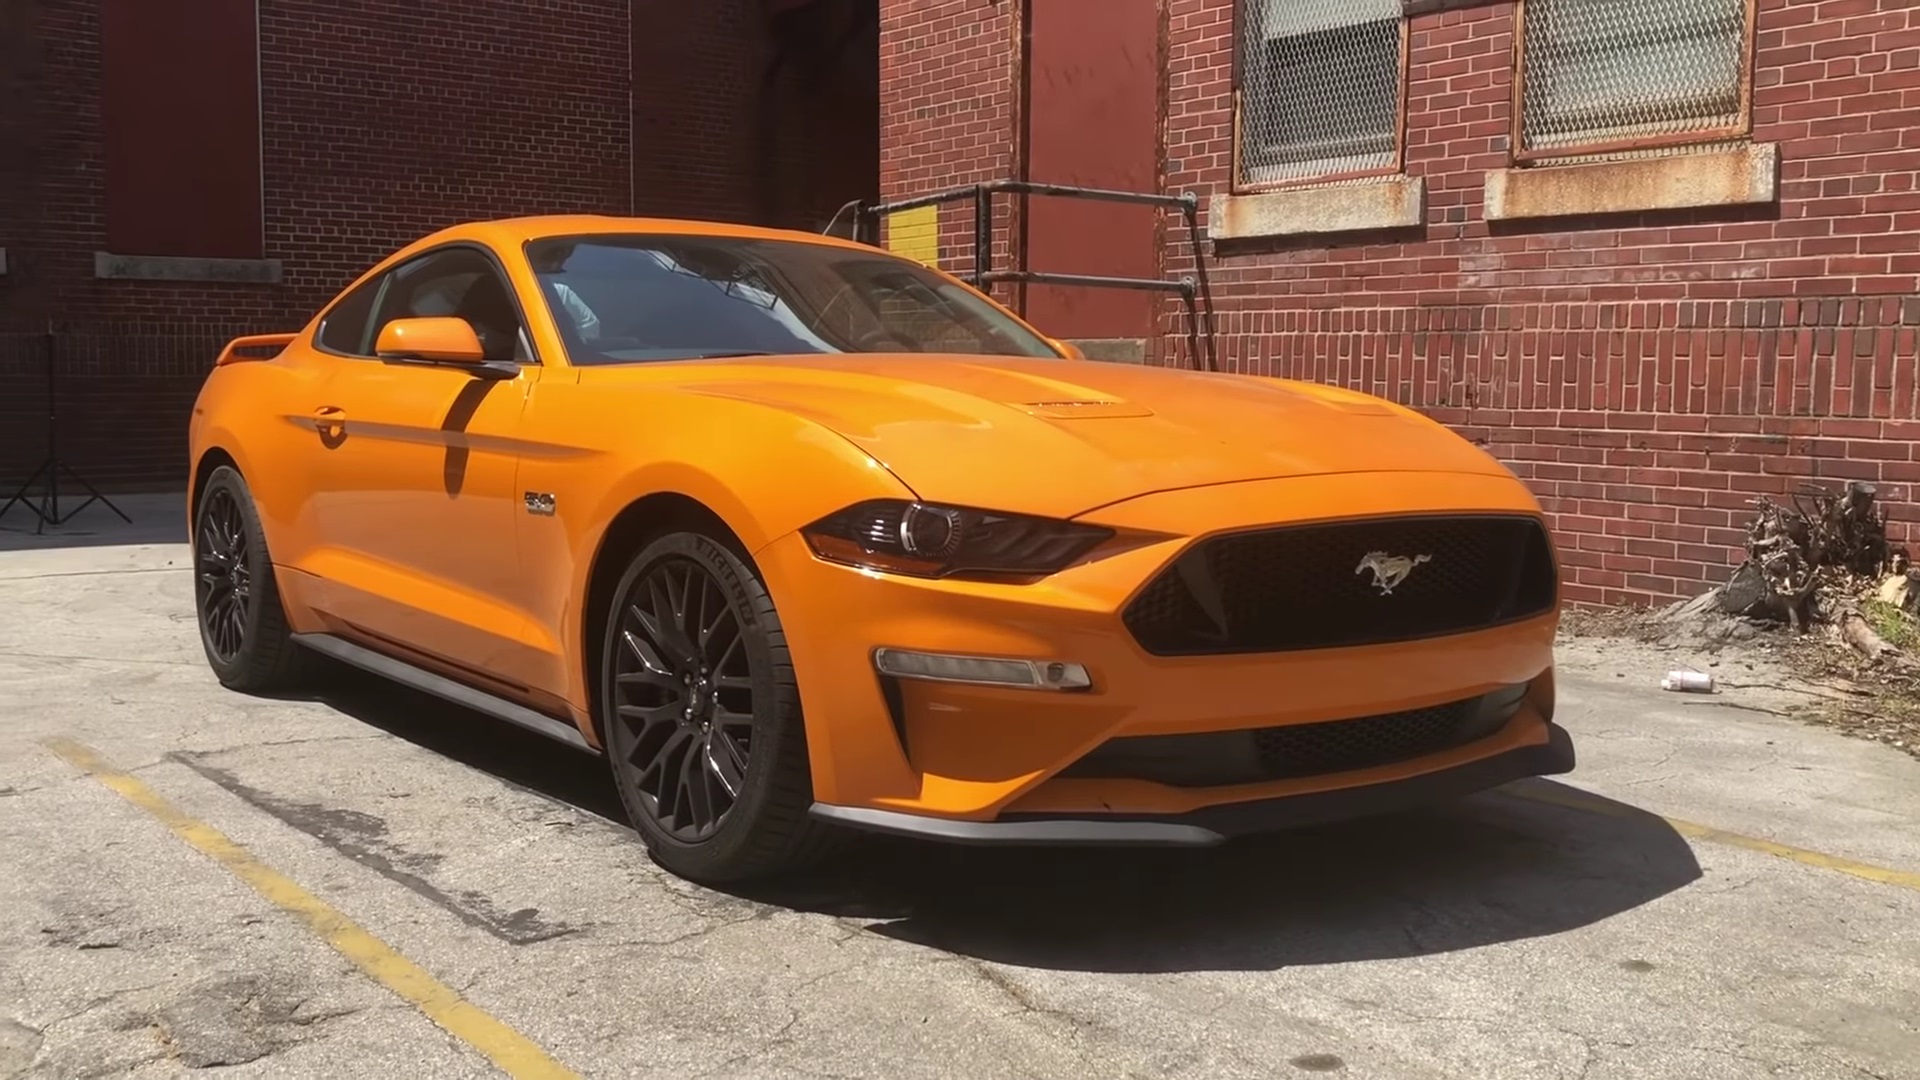 Video: Here's Why the 2018 Ford Mustang GT Now Costs Over $50,000